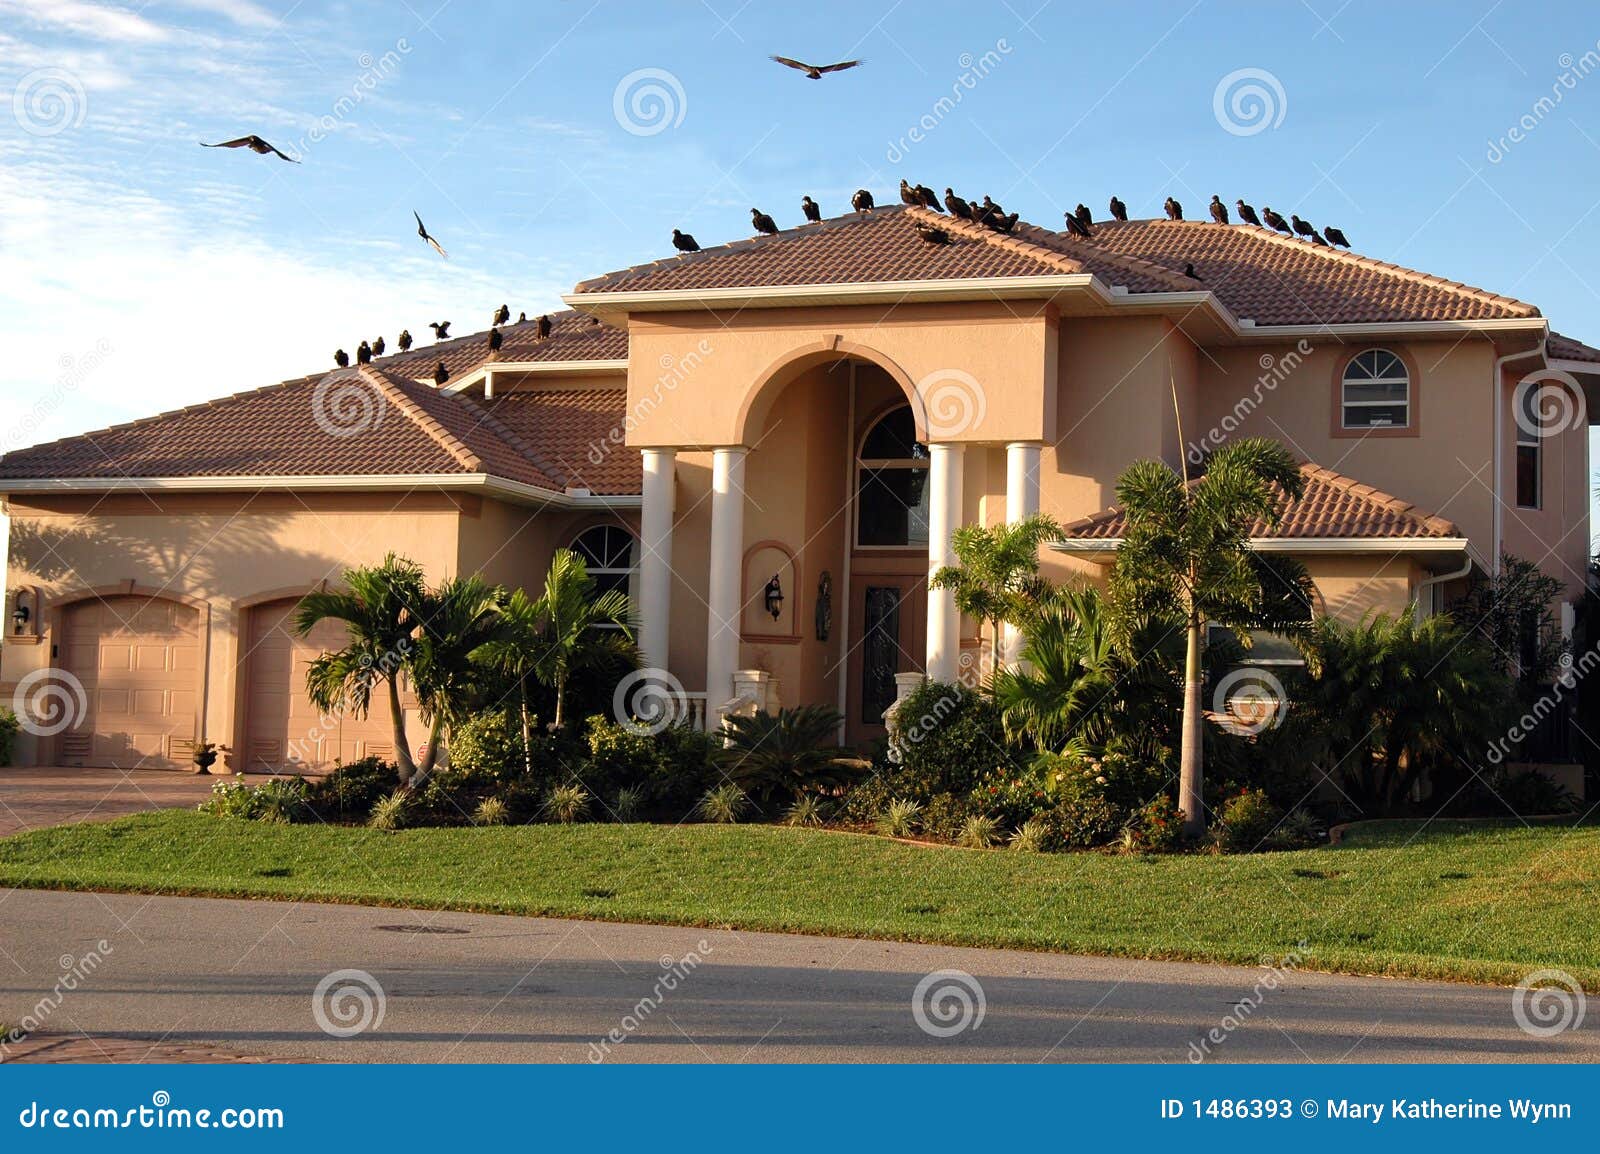 vultures on house (foreclosure)